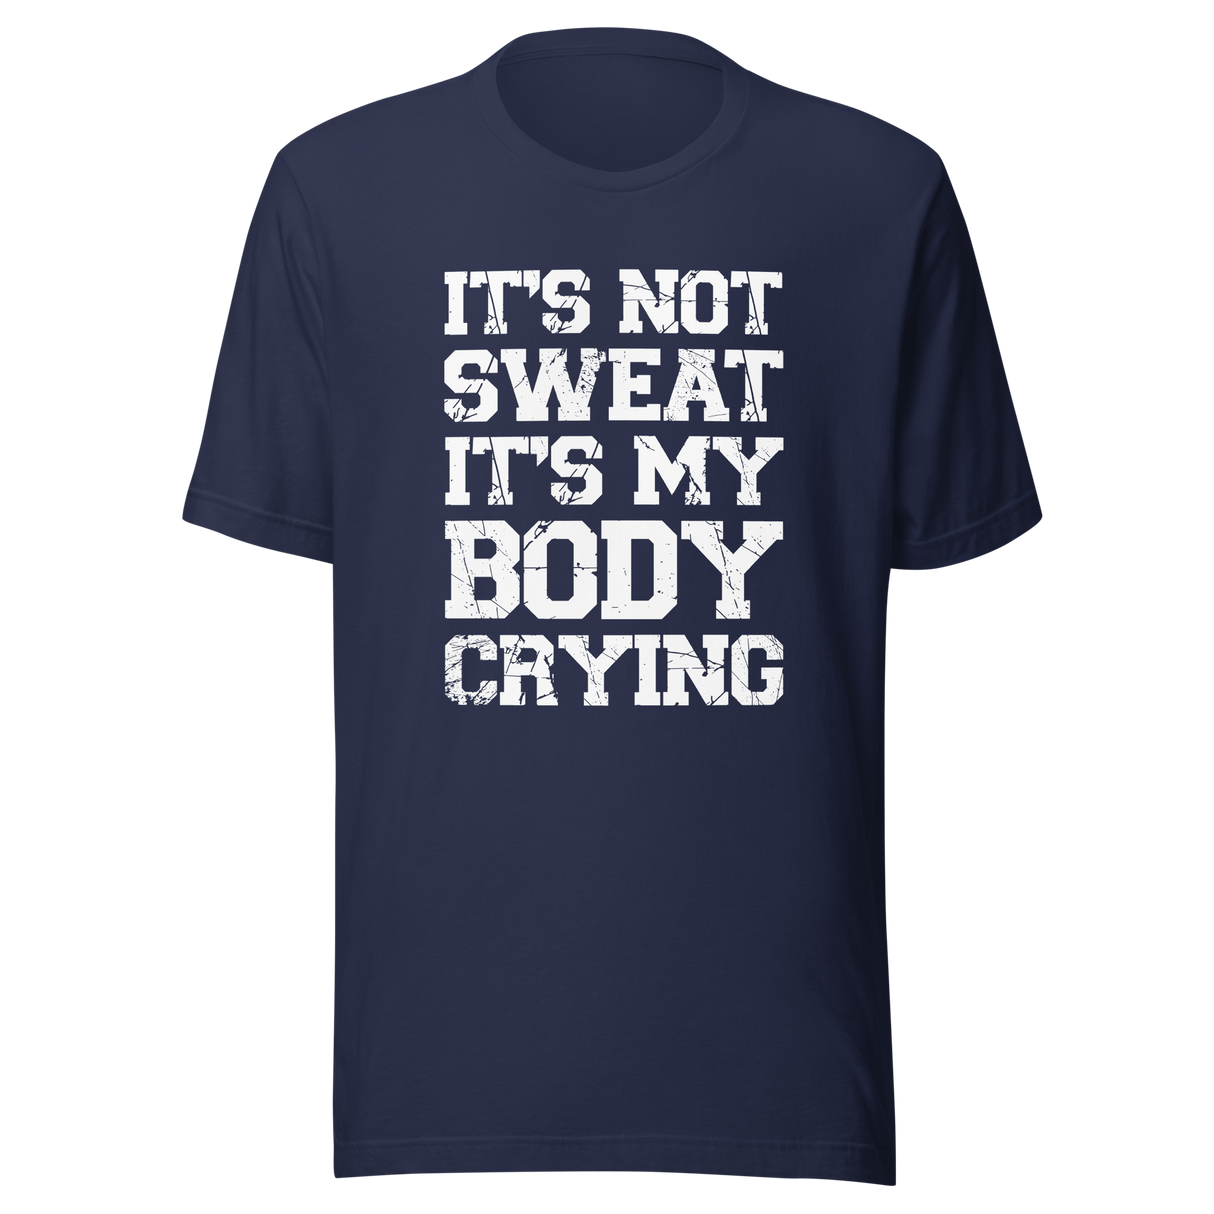 its-not-sweat-its-my-body-crying-gym-tee-awesome-t-shirt-workout-tee-fitness-t-shirt-truth-tee#color_navy